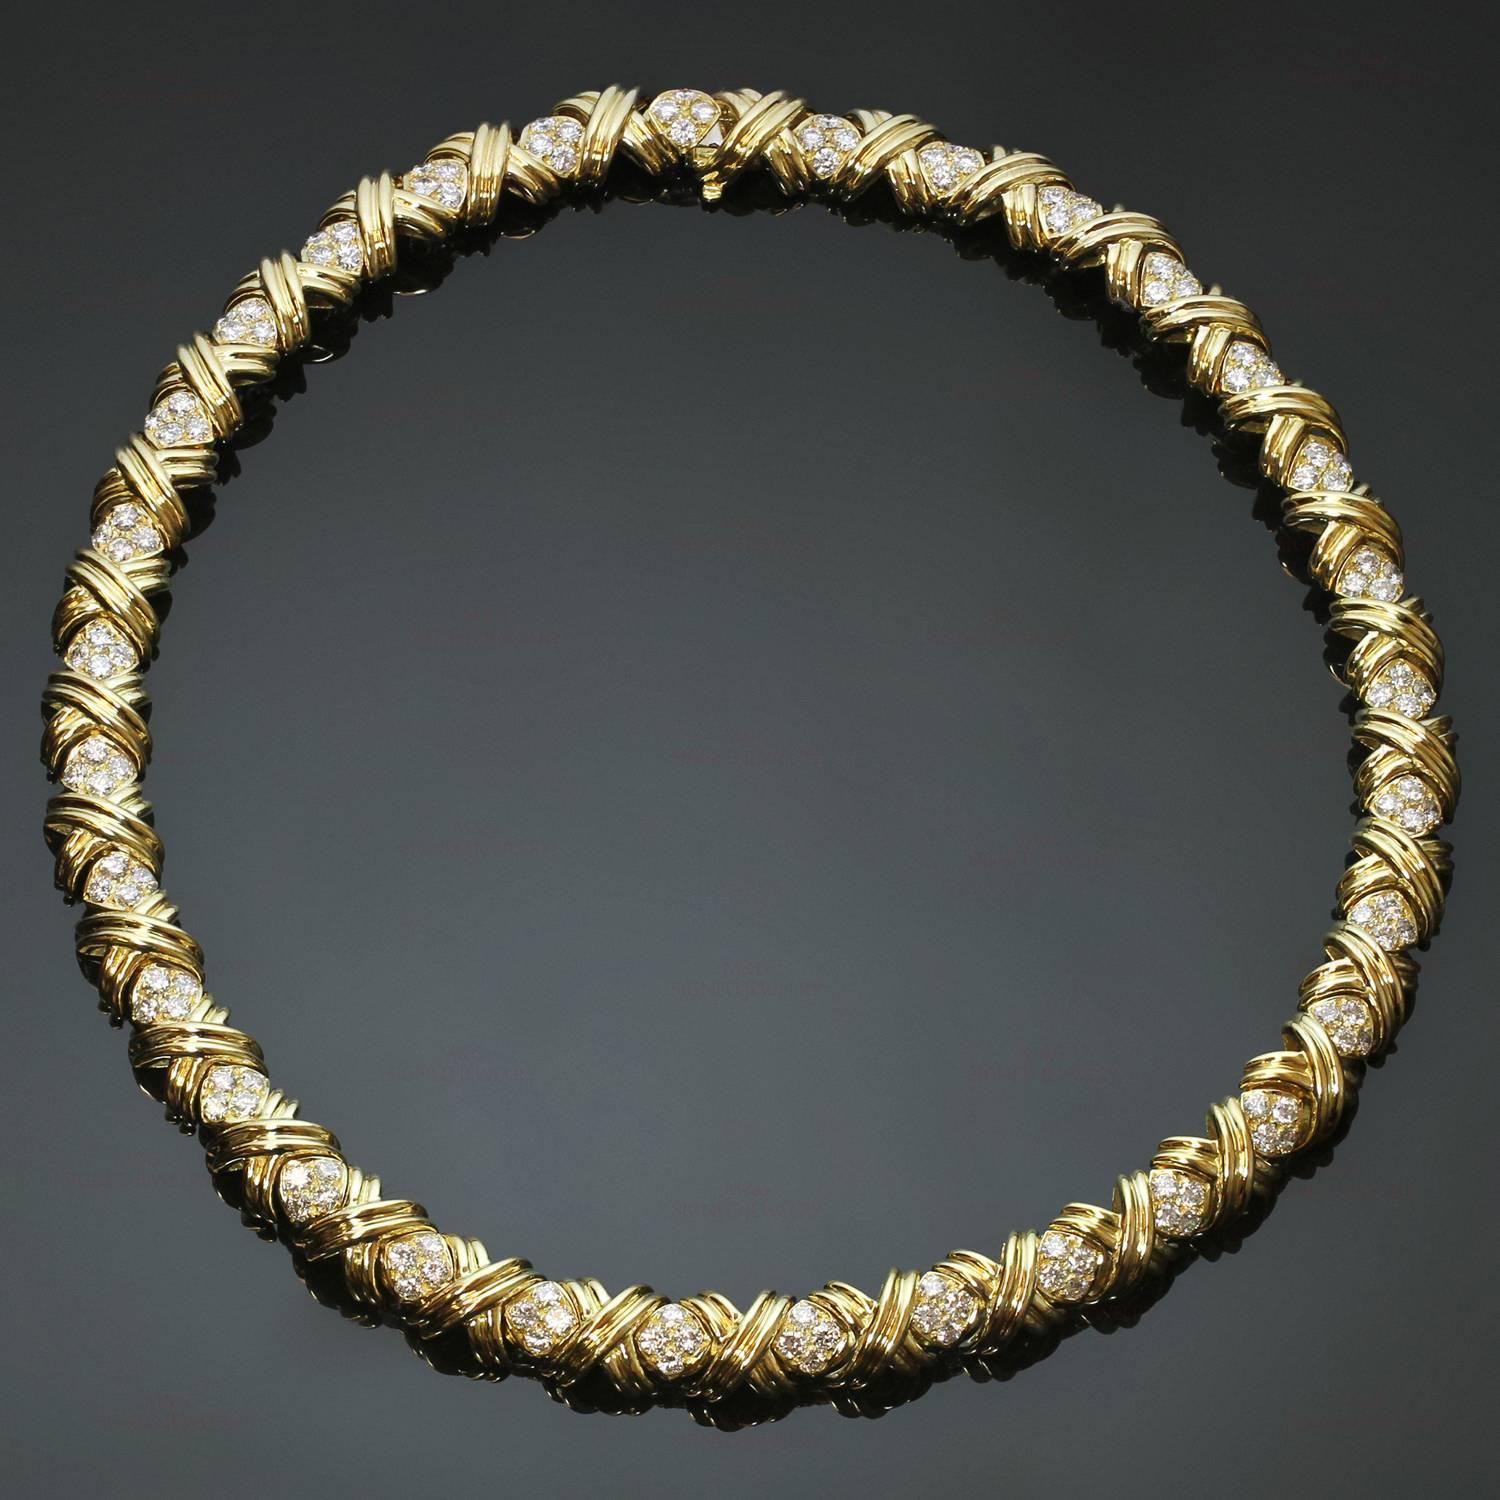 This magnificent Tiffany & Co. necklace features 32 classic X links crafted in 18k yellow gold and set with 128 brilliant-cut round diamonds of an estimated 9.6 carats. Made in United States circa 1990s. Measurements: 0.38